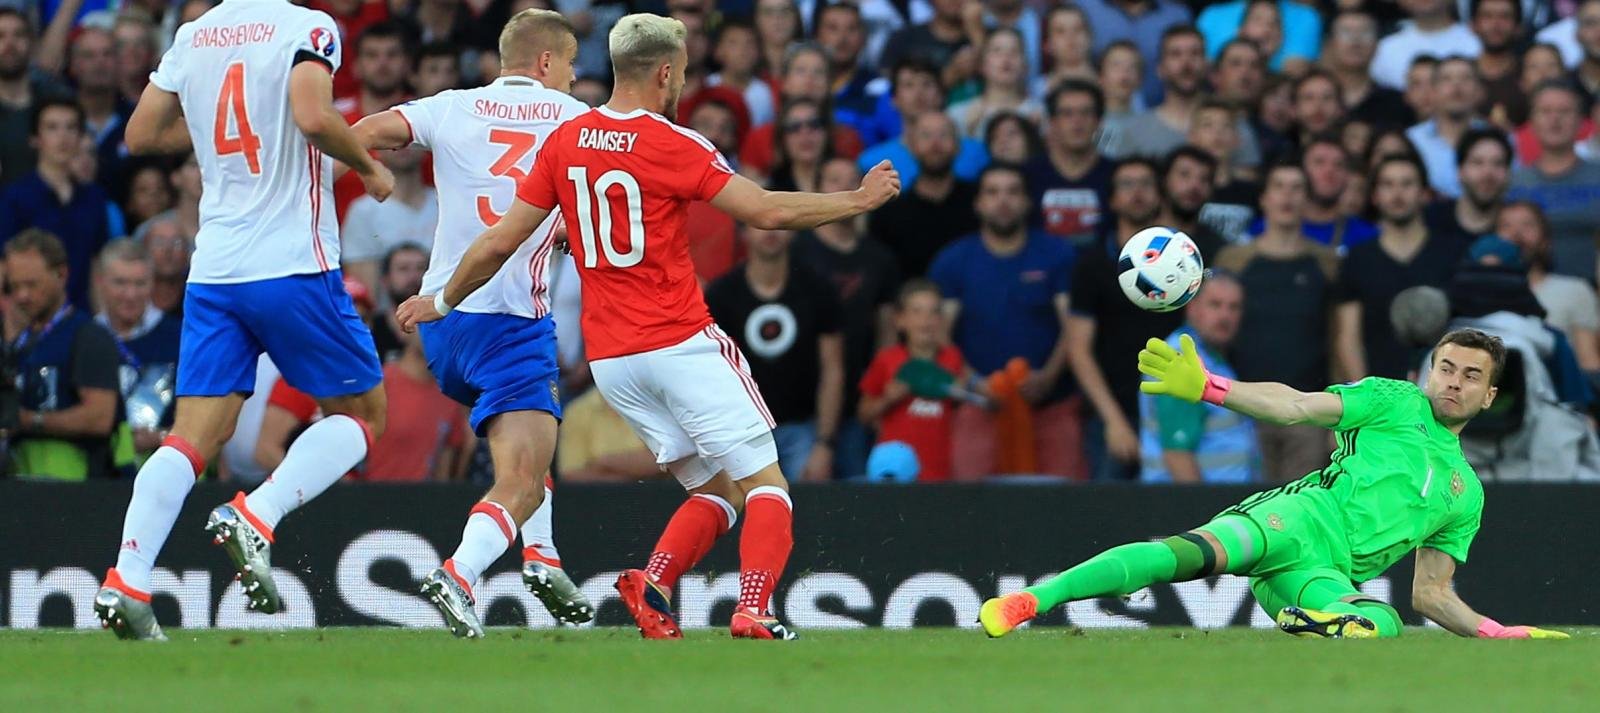 Russia 0-3 Wales: EURO 2016 Group B Report